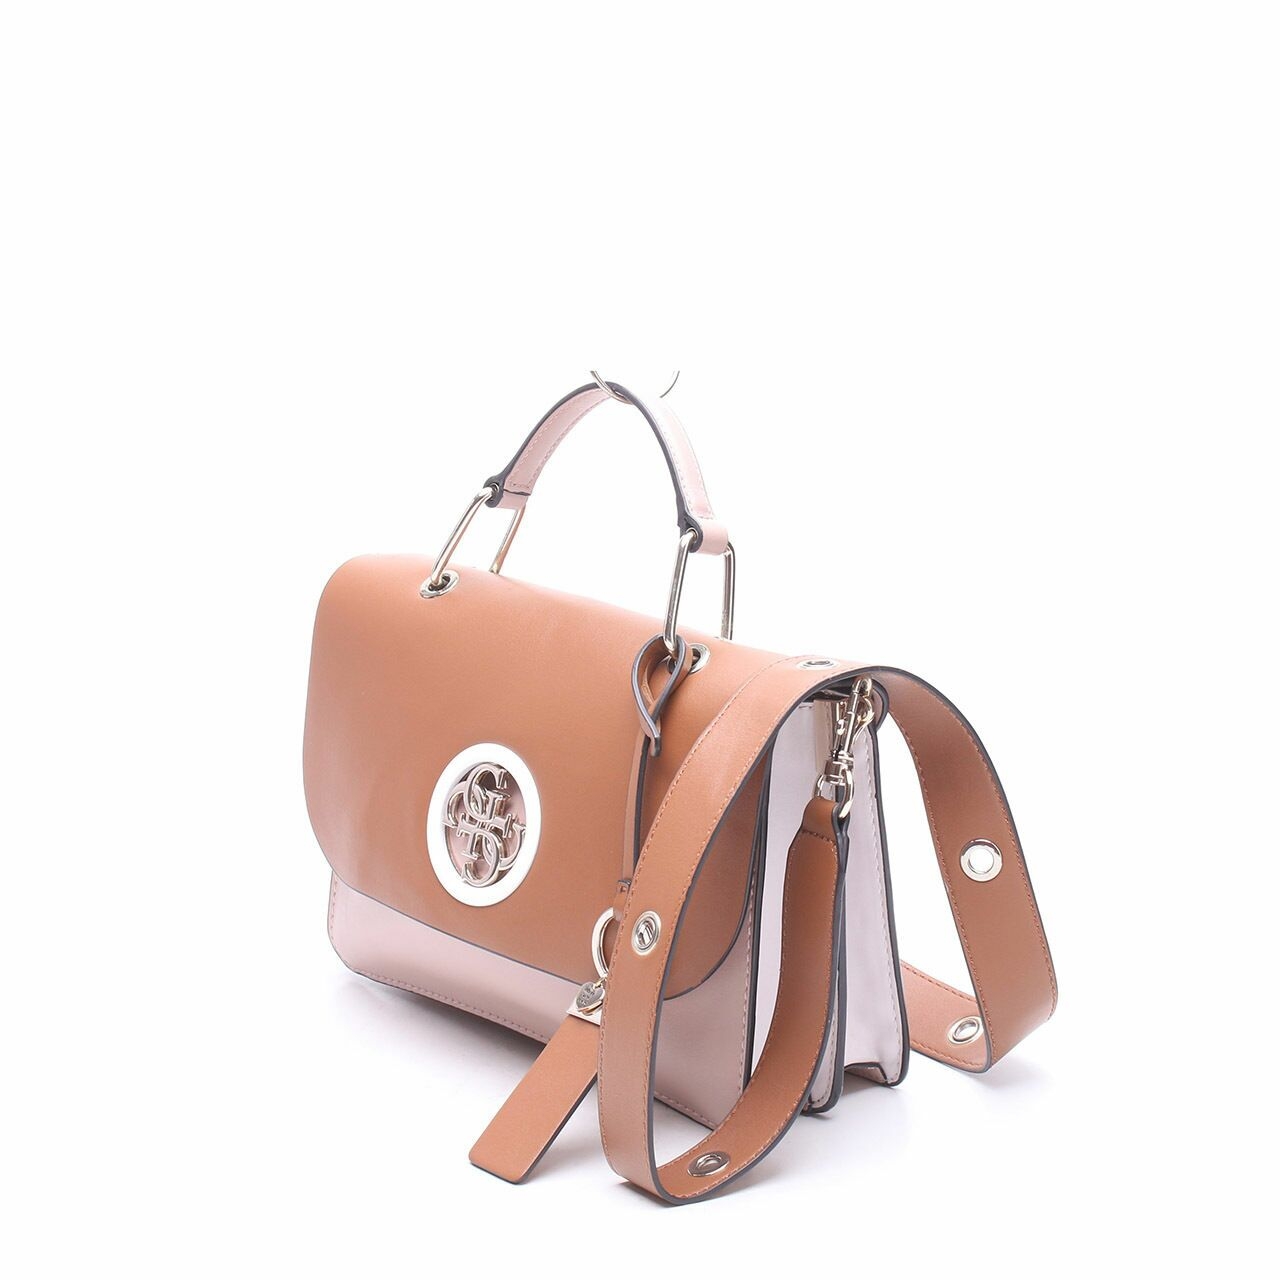 Guess Brown & Dusty Pink Satchel